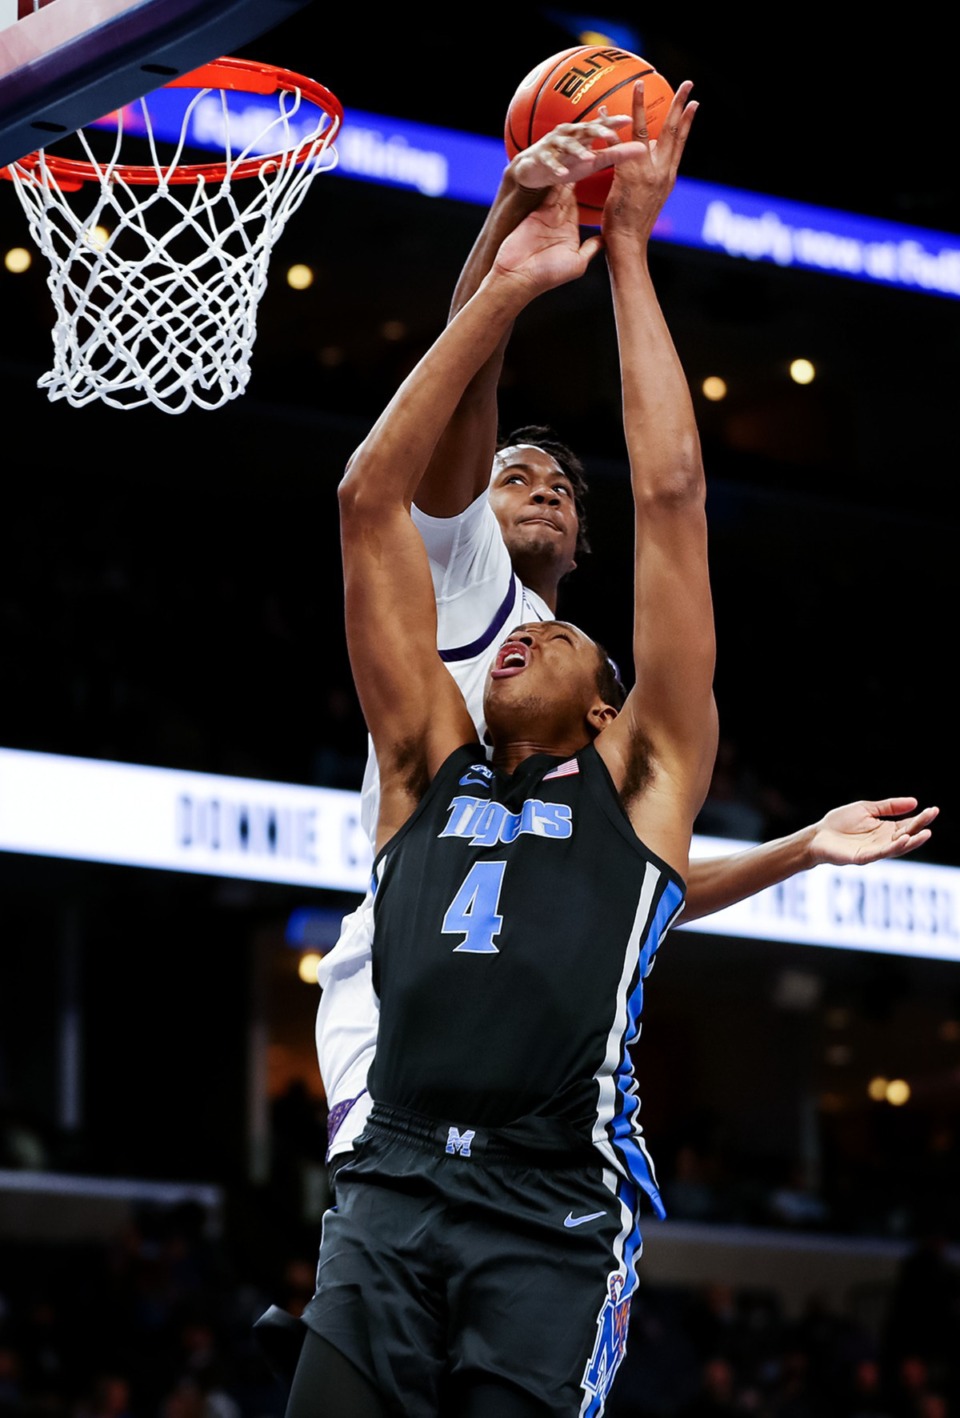 <strong>University of Memphis forward Chandler Lawson (4) goes up for a layup during a Jan. 27, 2022 game against ECU.</strong> (Patrick Lantrip/Daily Memphian)